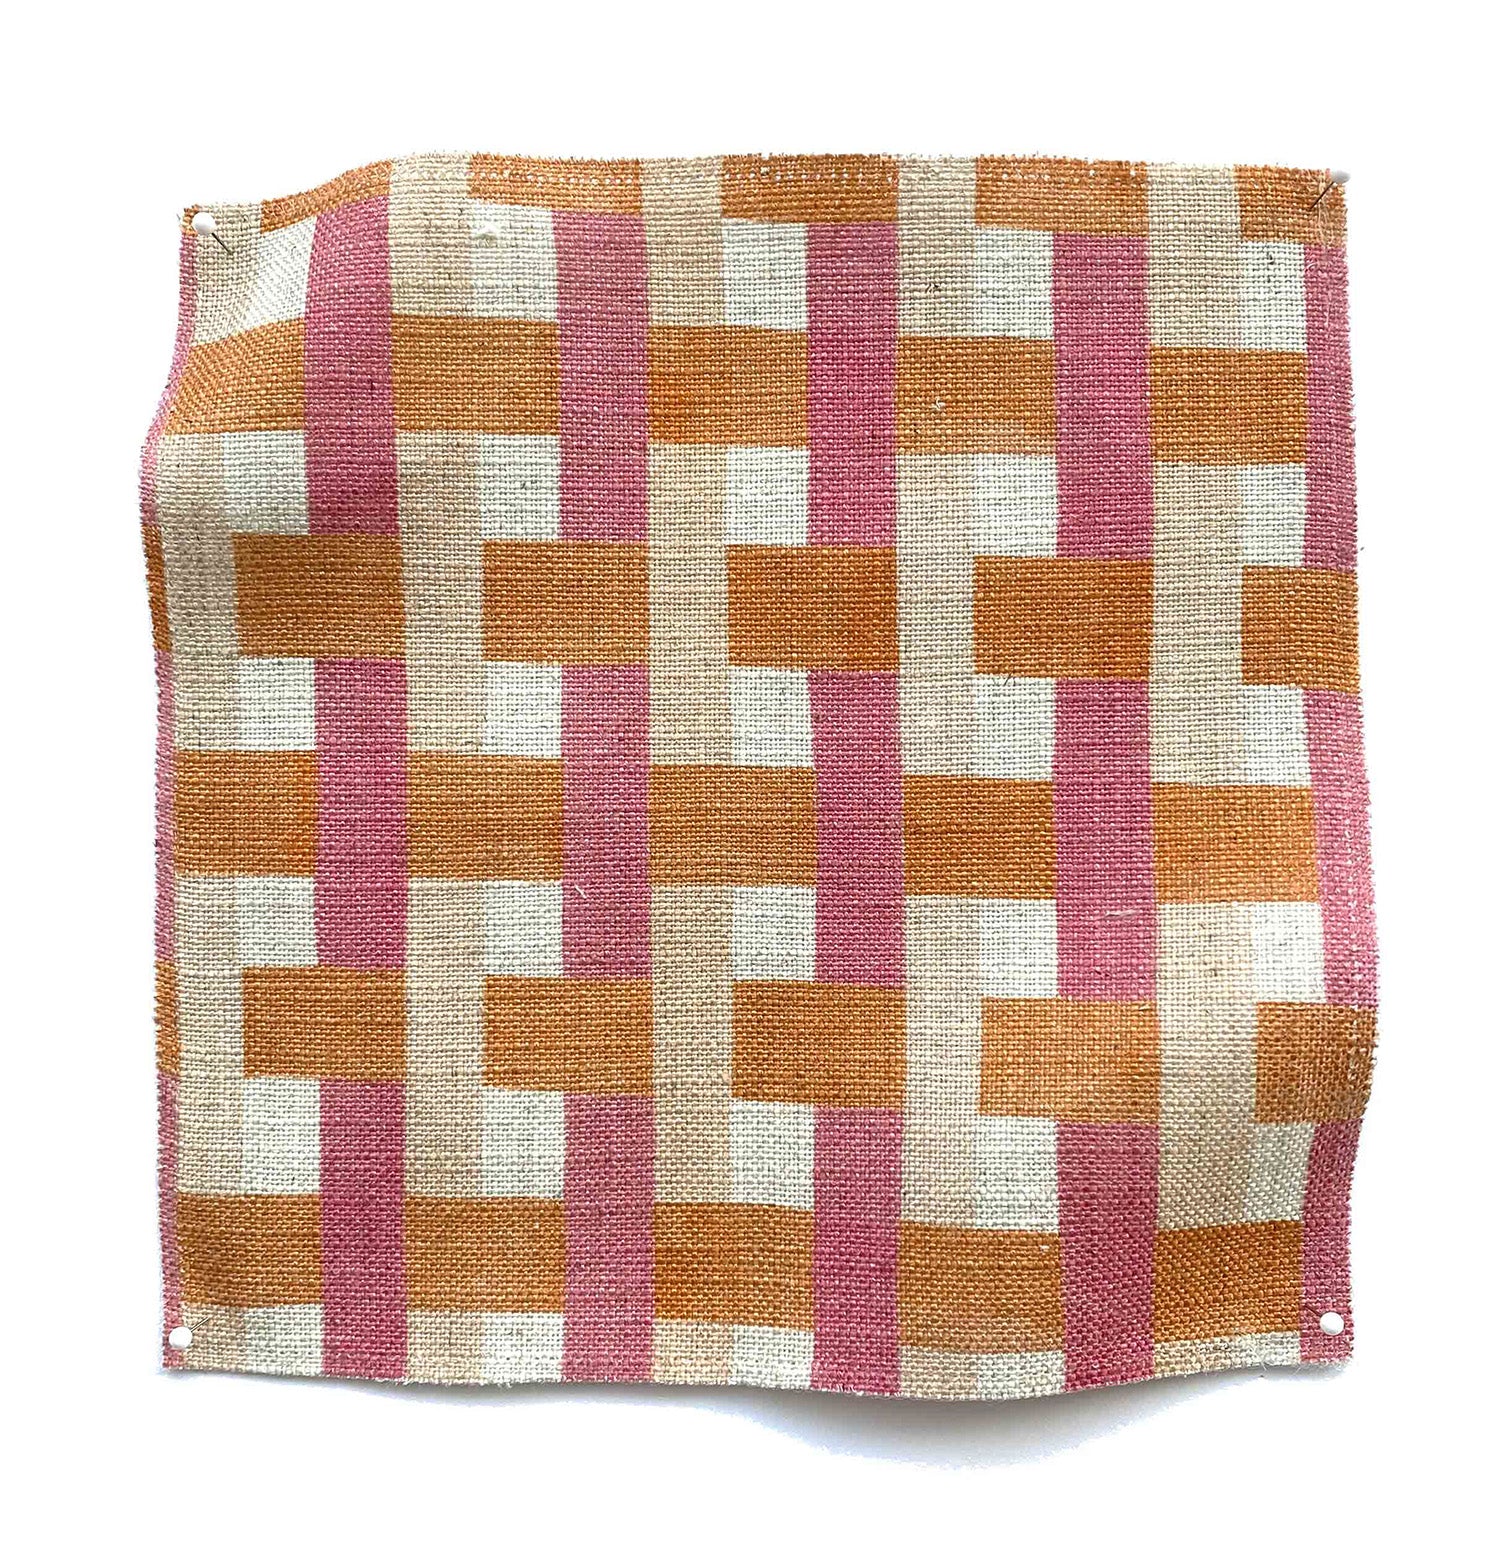 Square fabric swatch in an interlocking checked pattern in shades of tan, pink and orange.